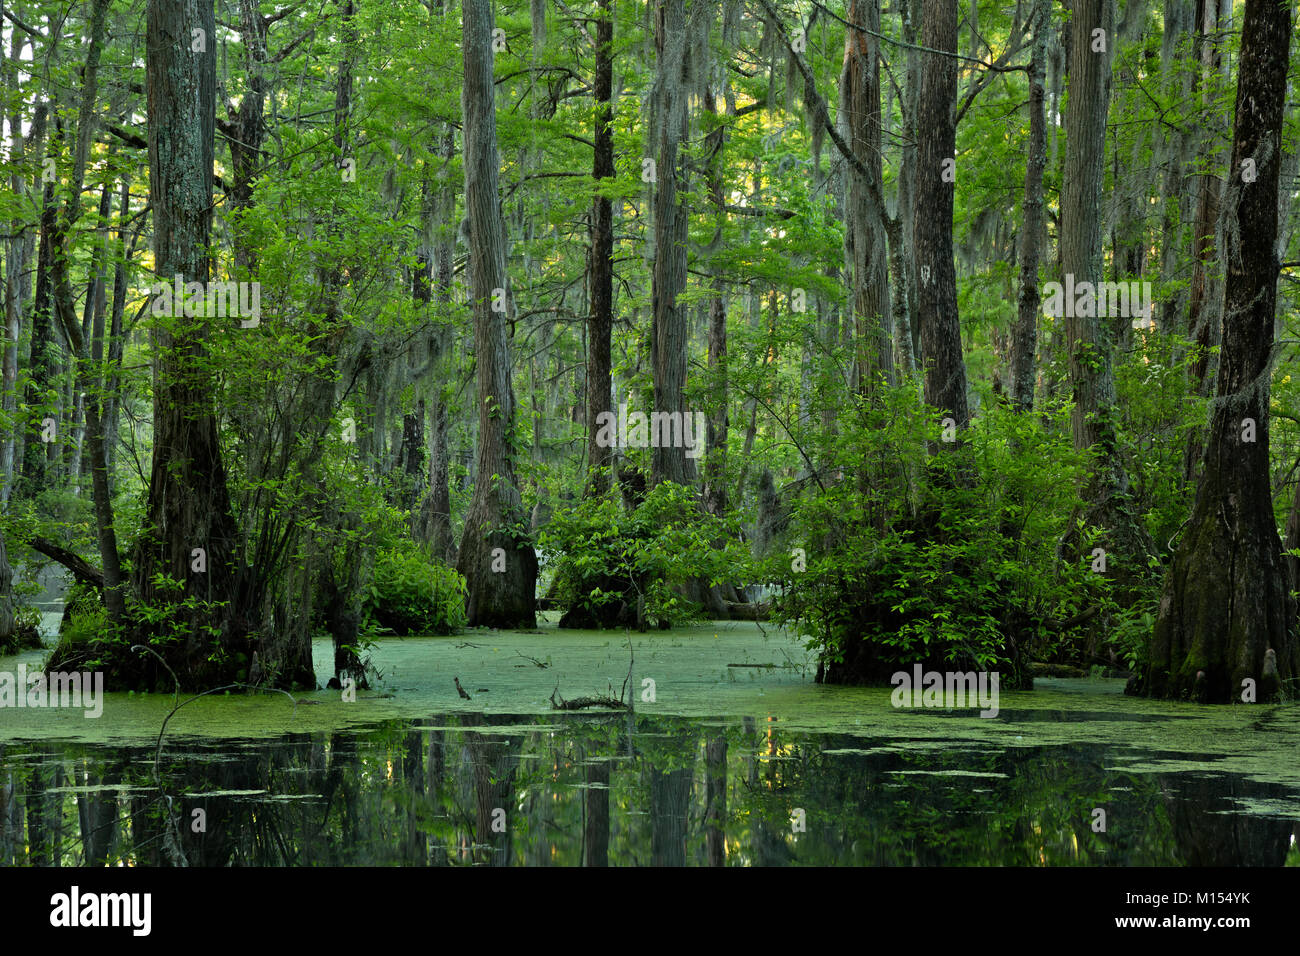 NC01482-00...NORTH CAROLINA - Bald cypress and tupalo gum trees surrounded by a floating mat of duckweed in Merchant Millpond; at Merchant Millpond St Stock Photo